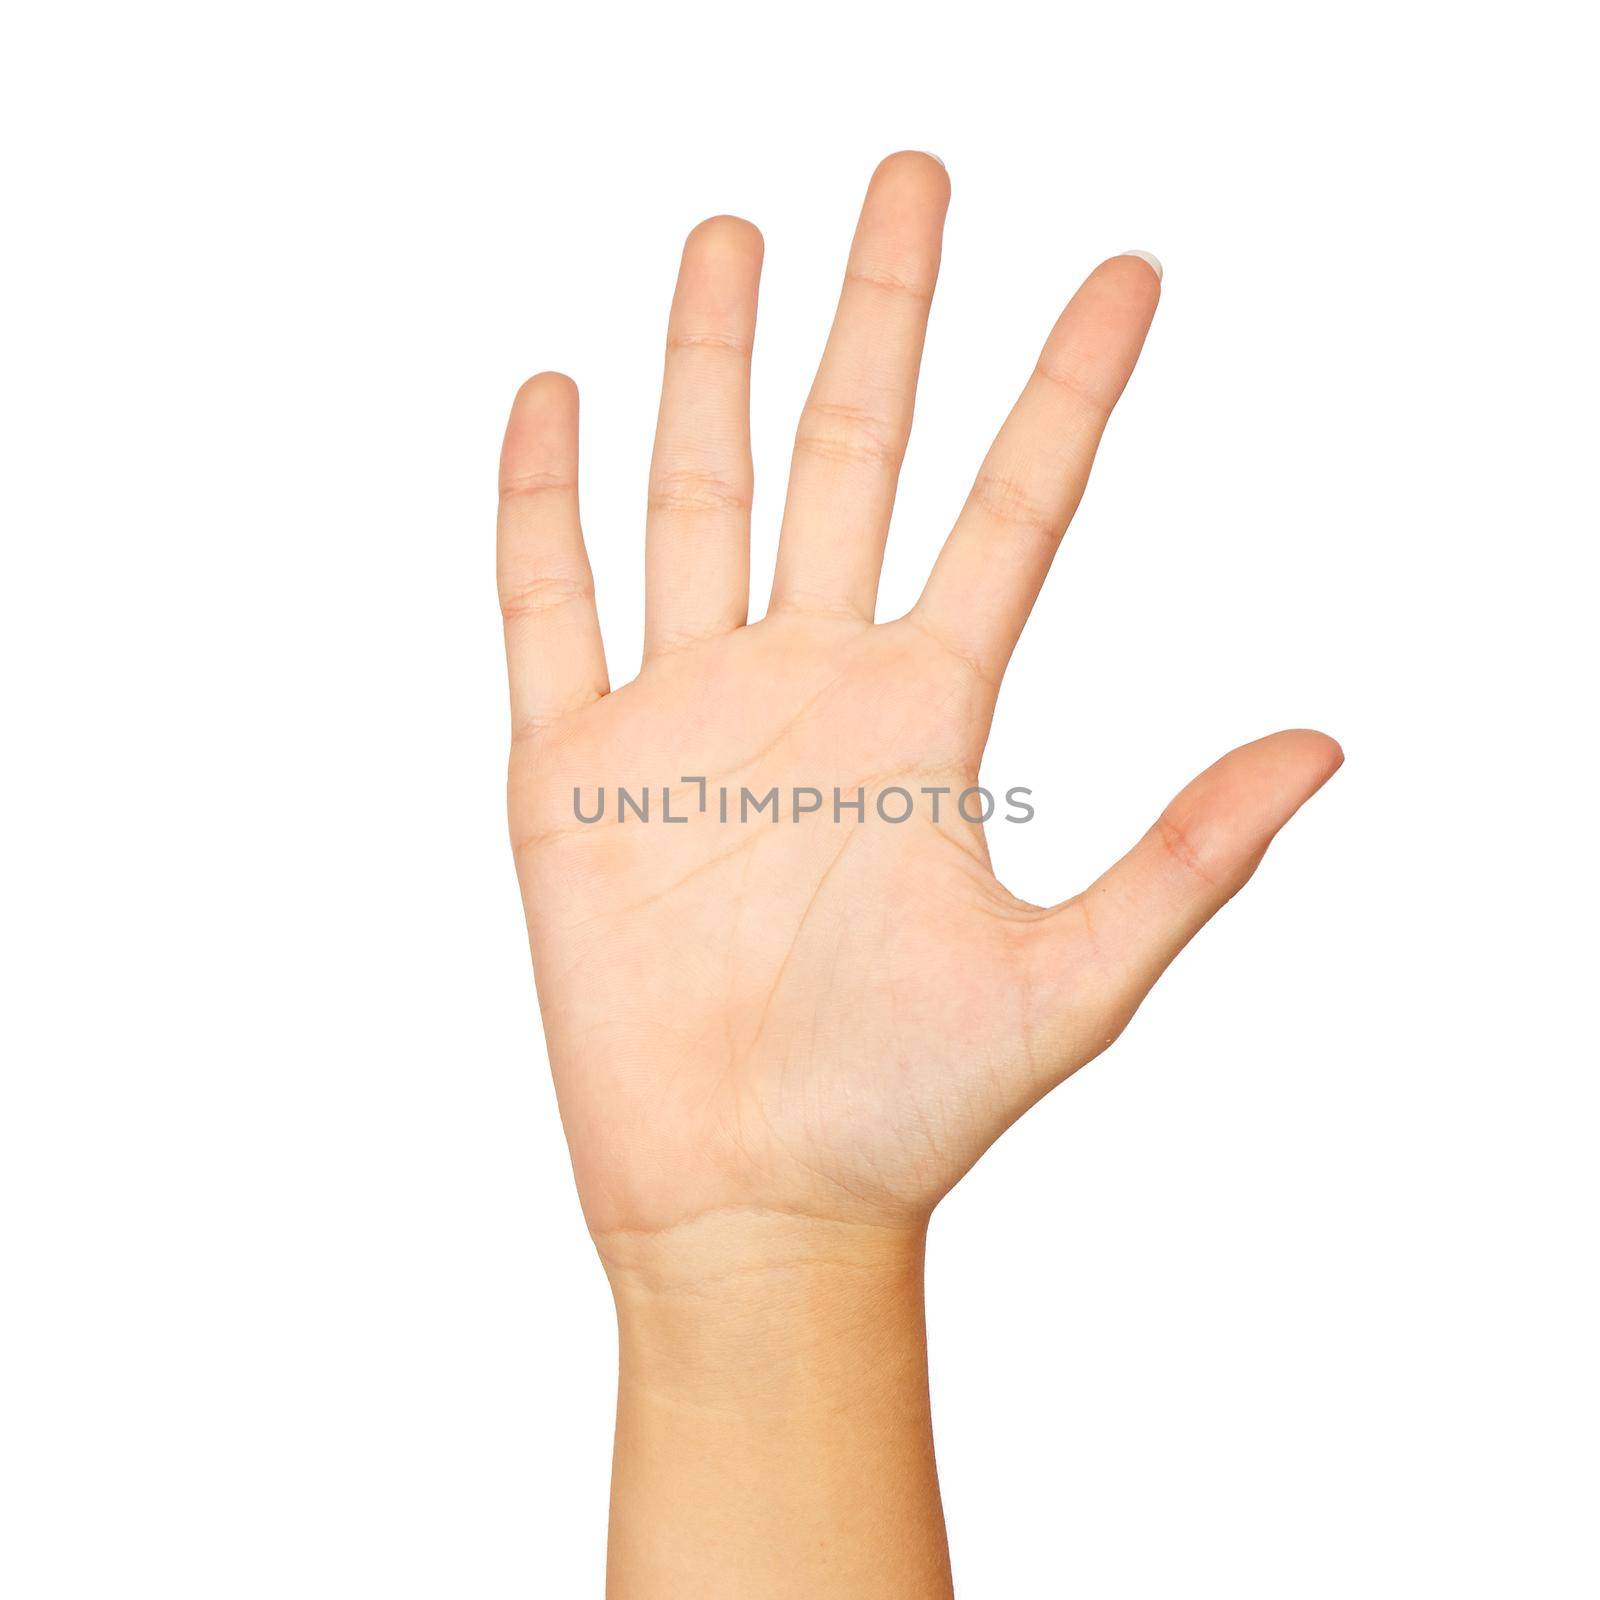 american sign language number 5. female hand gesturing isolated on white background